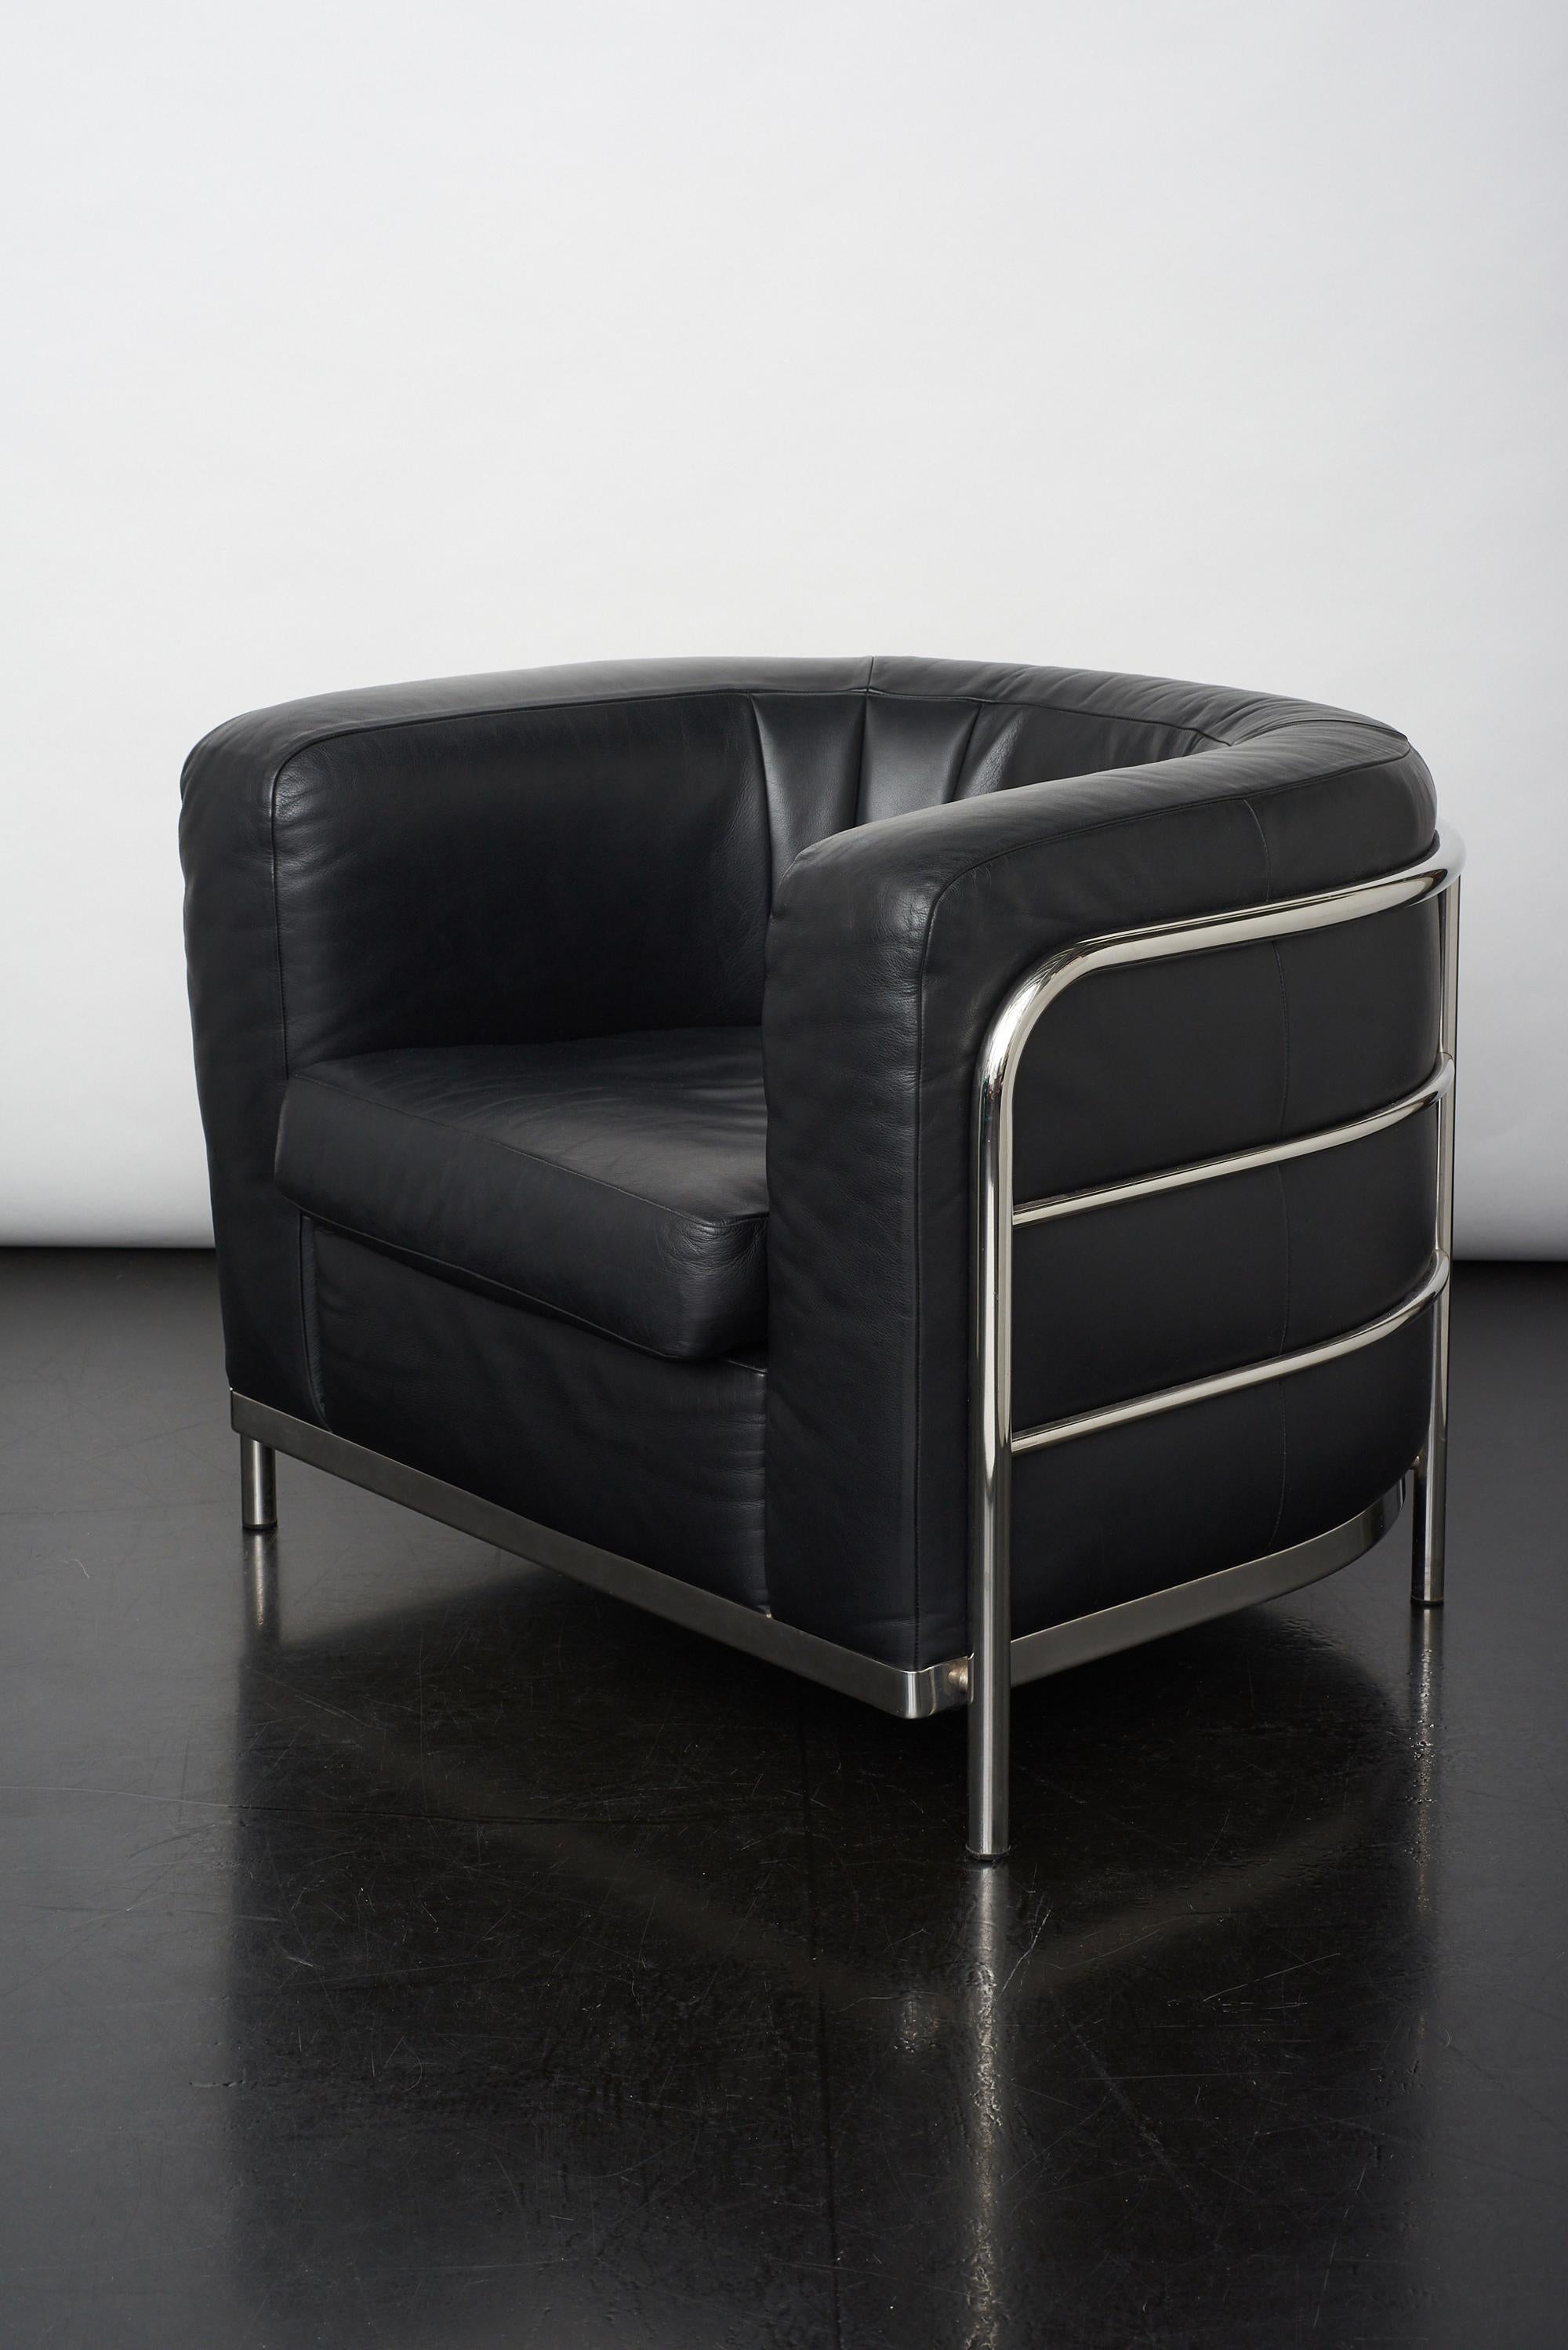 Onda armchair by Zanotta designed by Jonathan De Pas, Donato D'Urbino and Paolo Lomazzi, 1985.
A very elegant and luxurious piece of furniture that will enhance any corner of the house or office.
Supporting structure made of 18/8 stainless steel